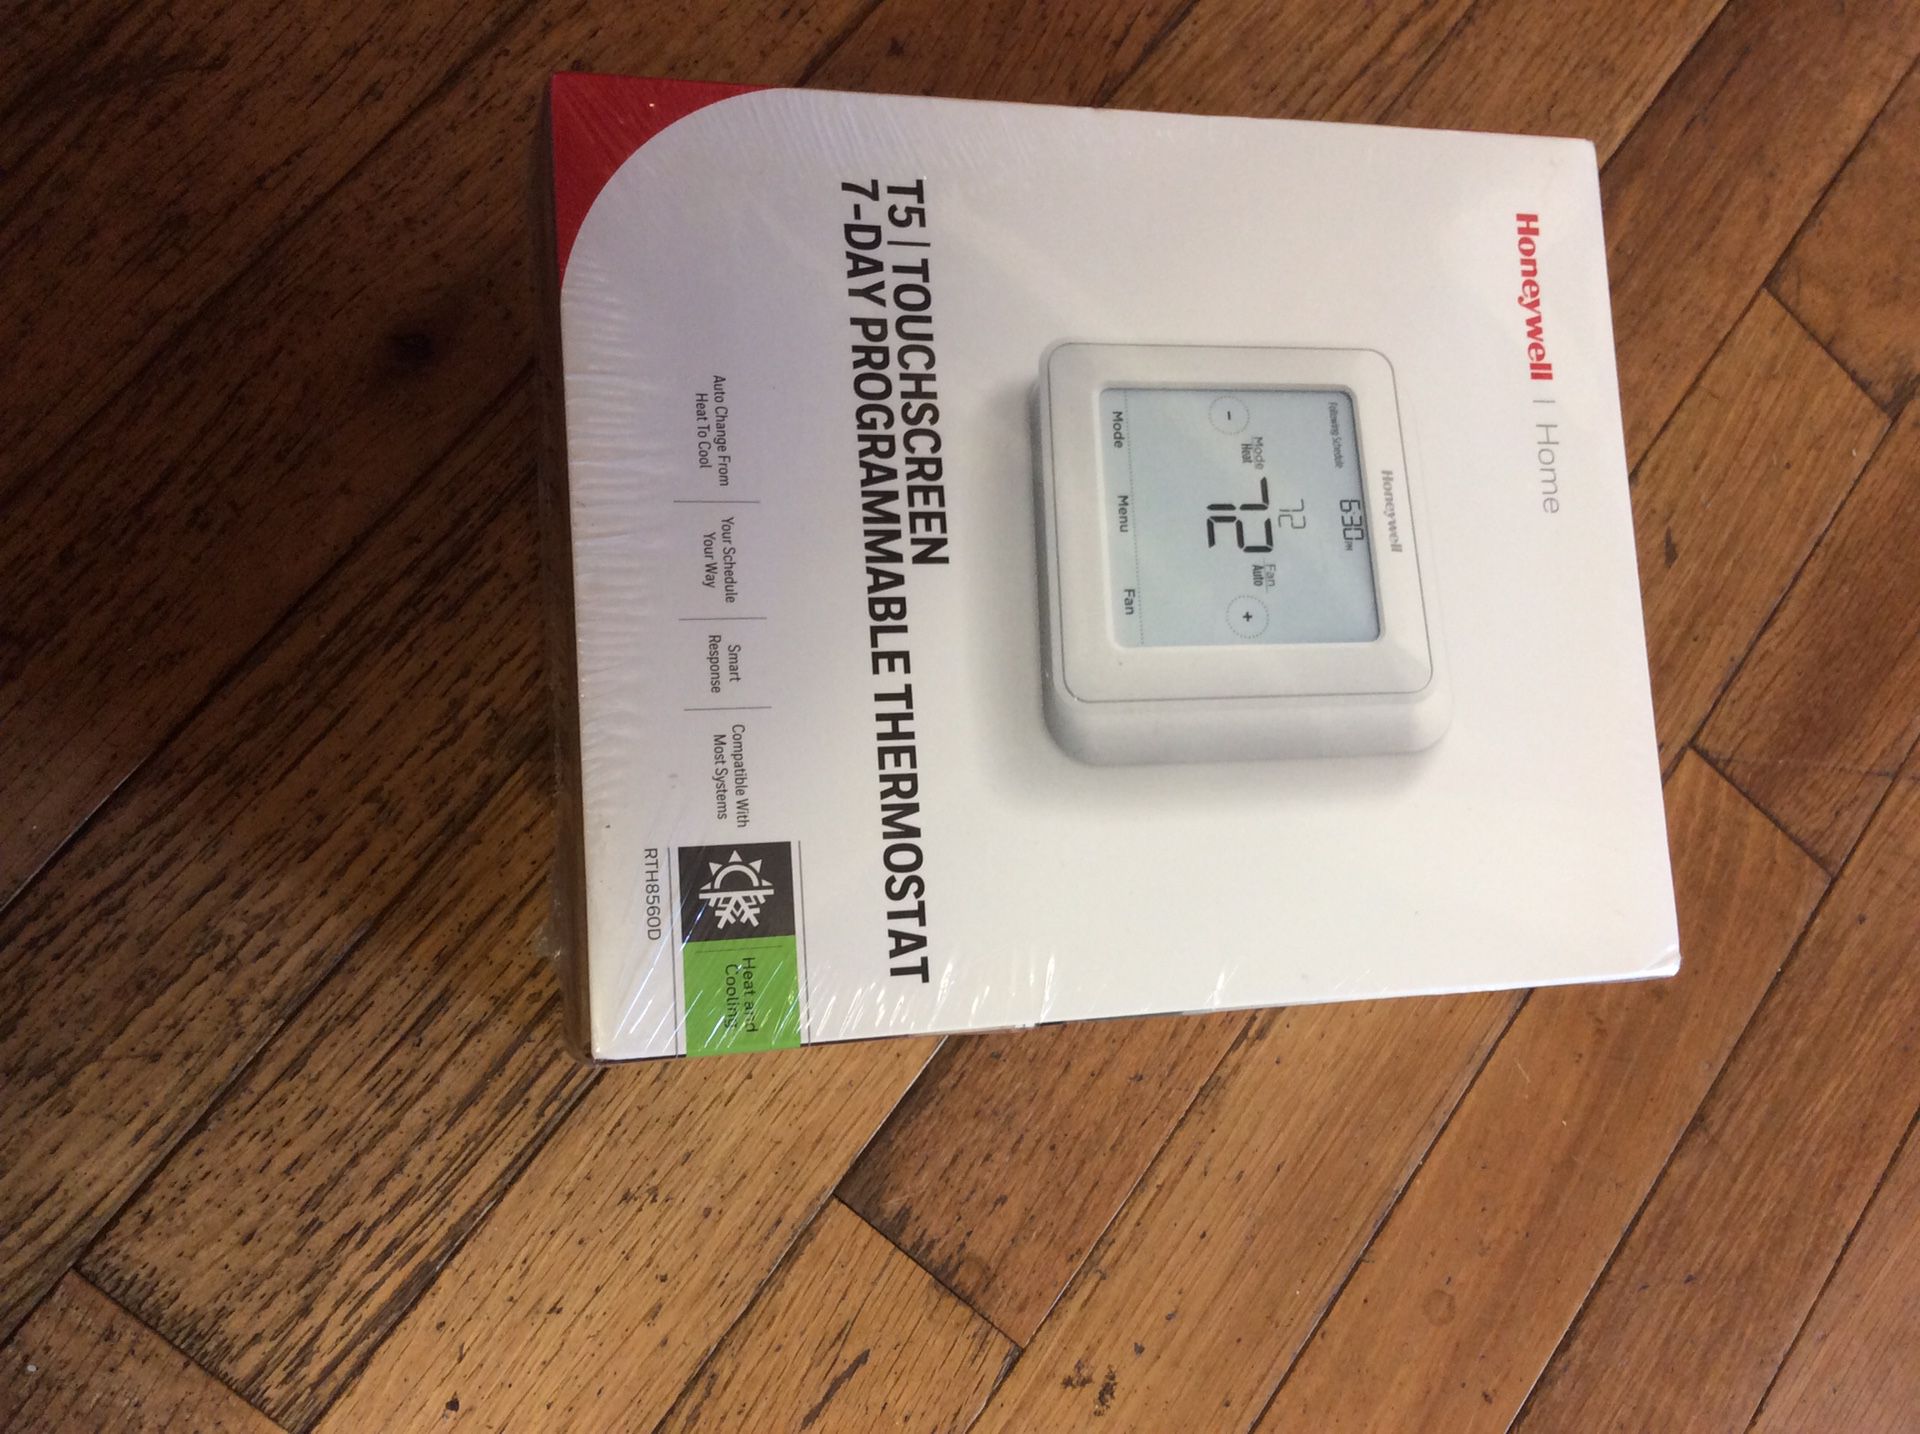 T5 Touchscreen Thermostat